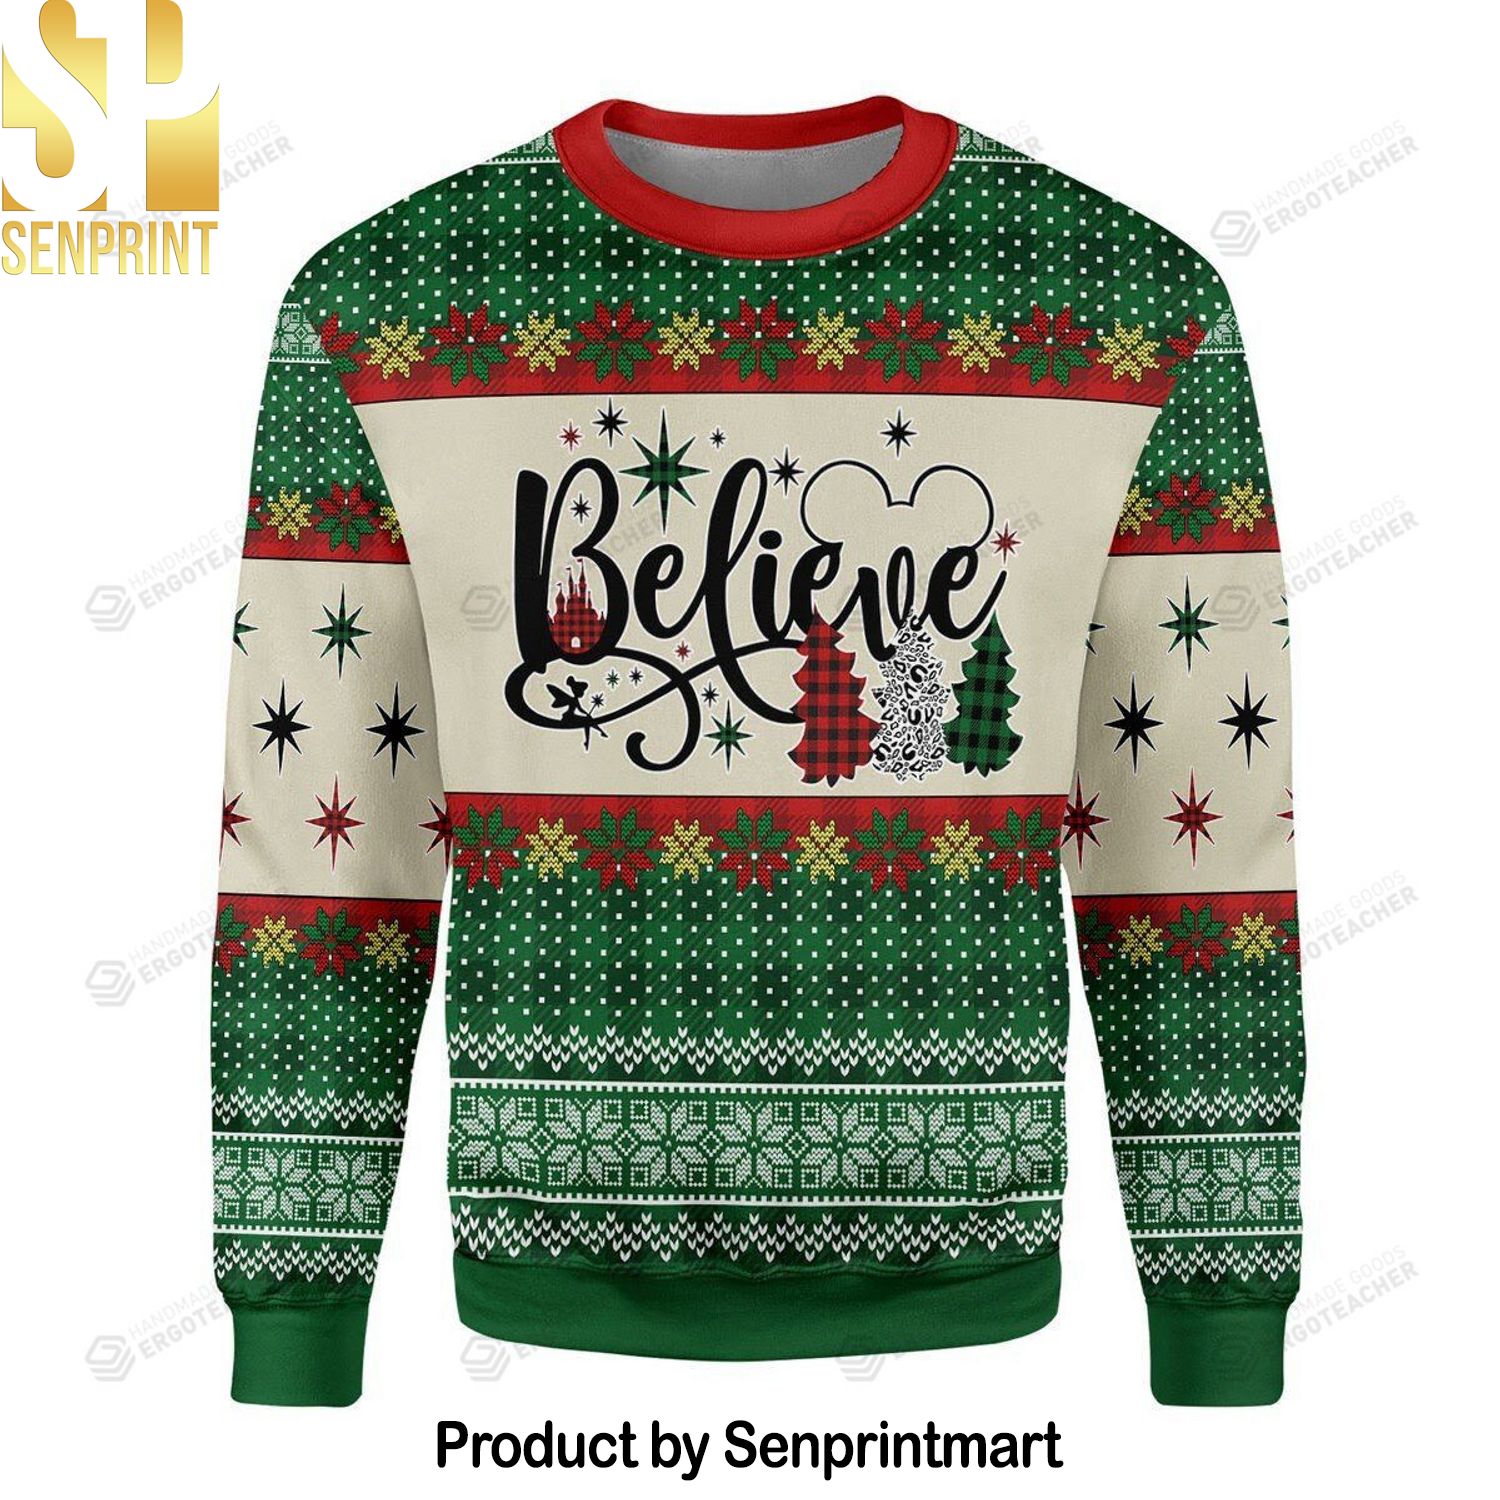 Believe Ugly Christmas Holiday Sweater